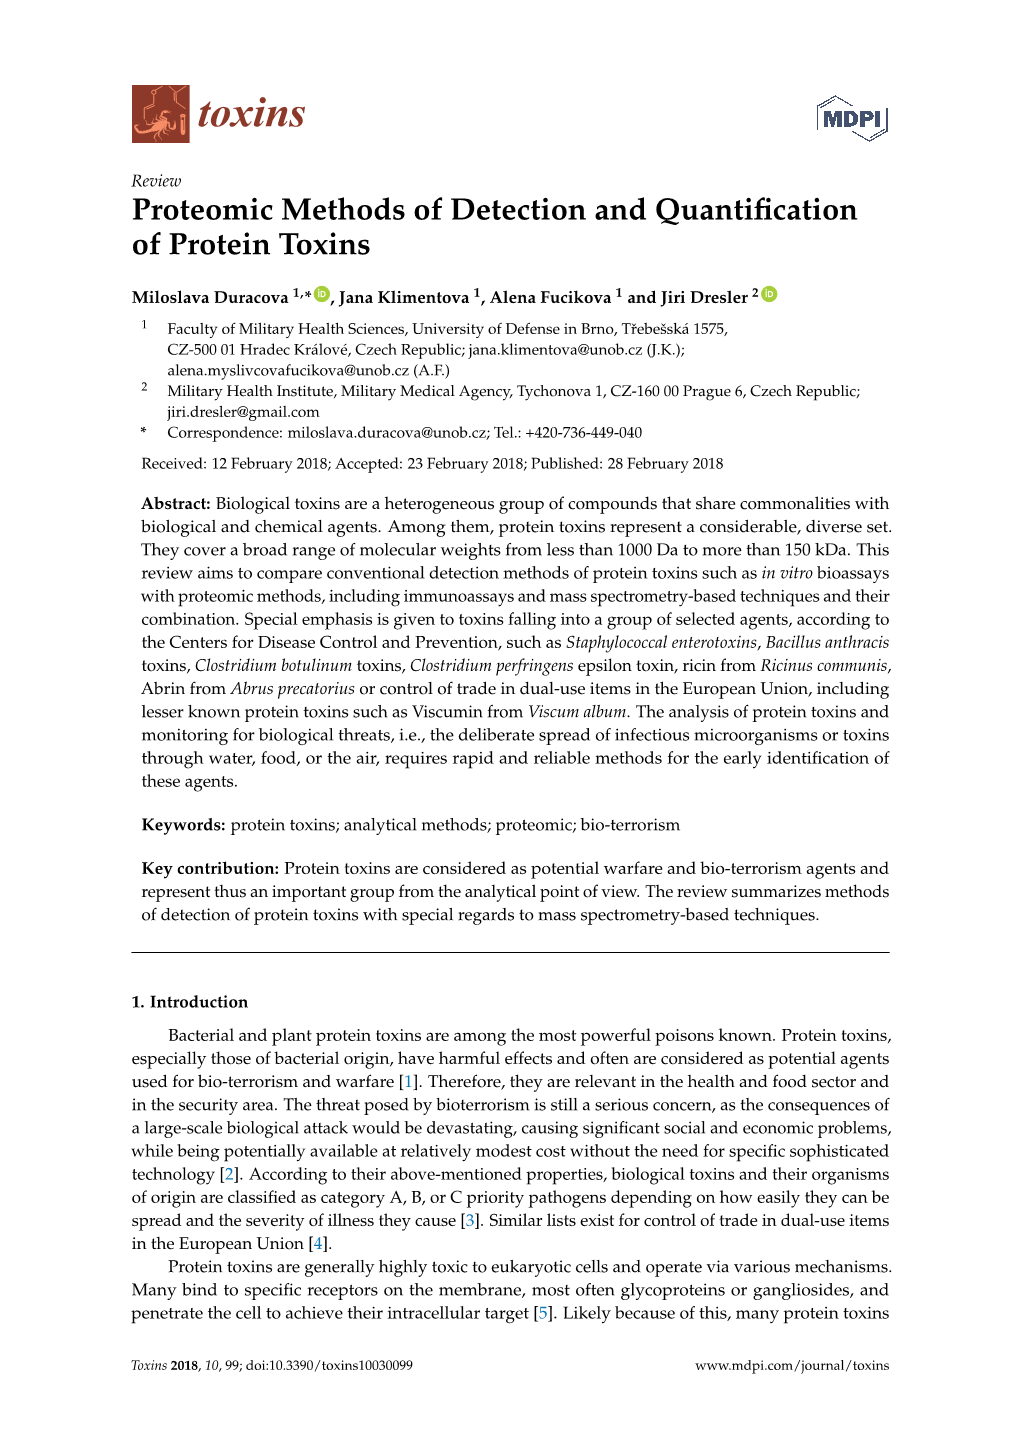 Proteomic Methods of Detection and Quantification of Protein